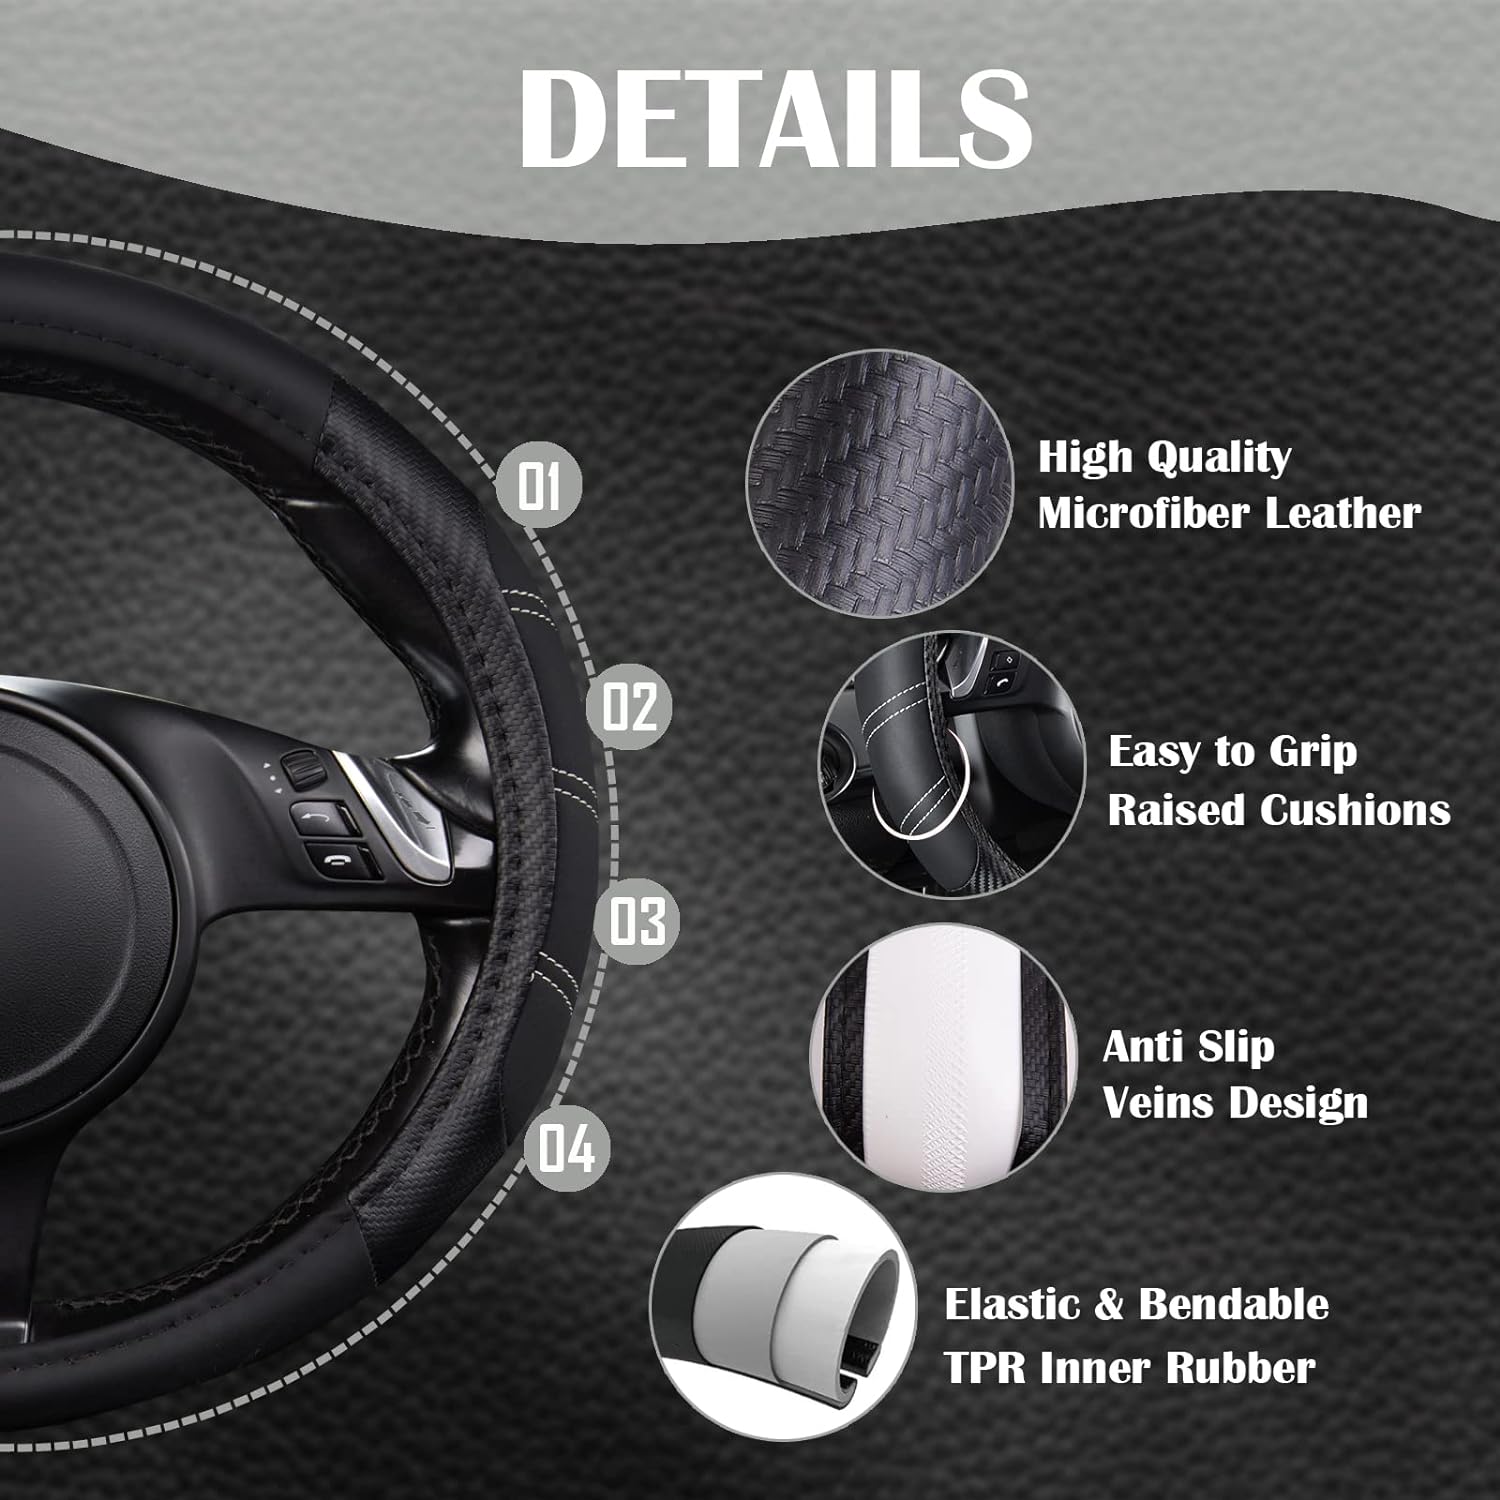 CAR PASS Luxurous PU Leather Automotive Universal Seat Covers Set, Line Rider Microfiber Leather Sporty Steering Wheel Cover Universal Fits for 95% Truck,SUV,Cars, Anti-Slip (Black)